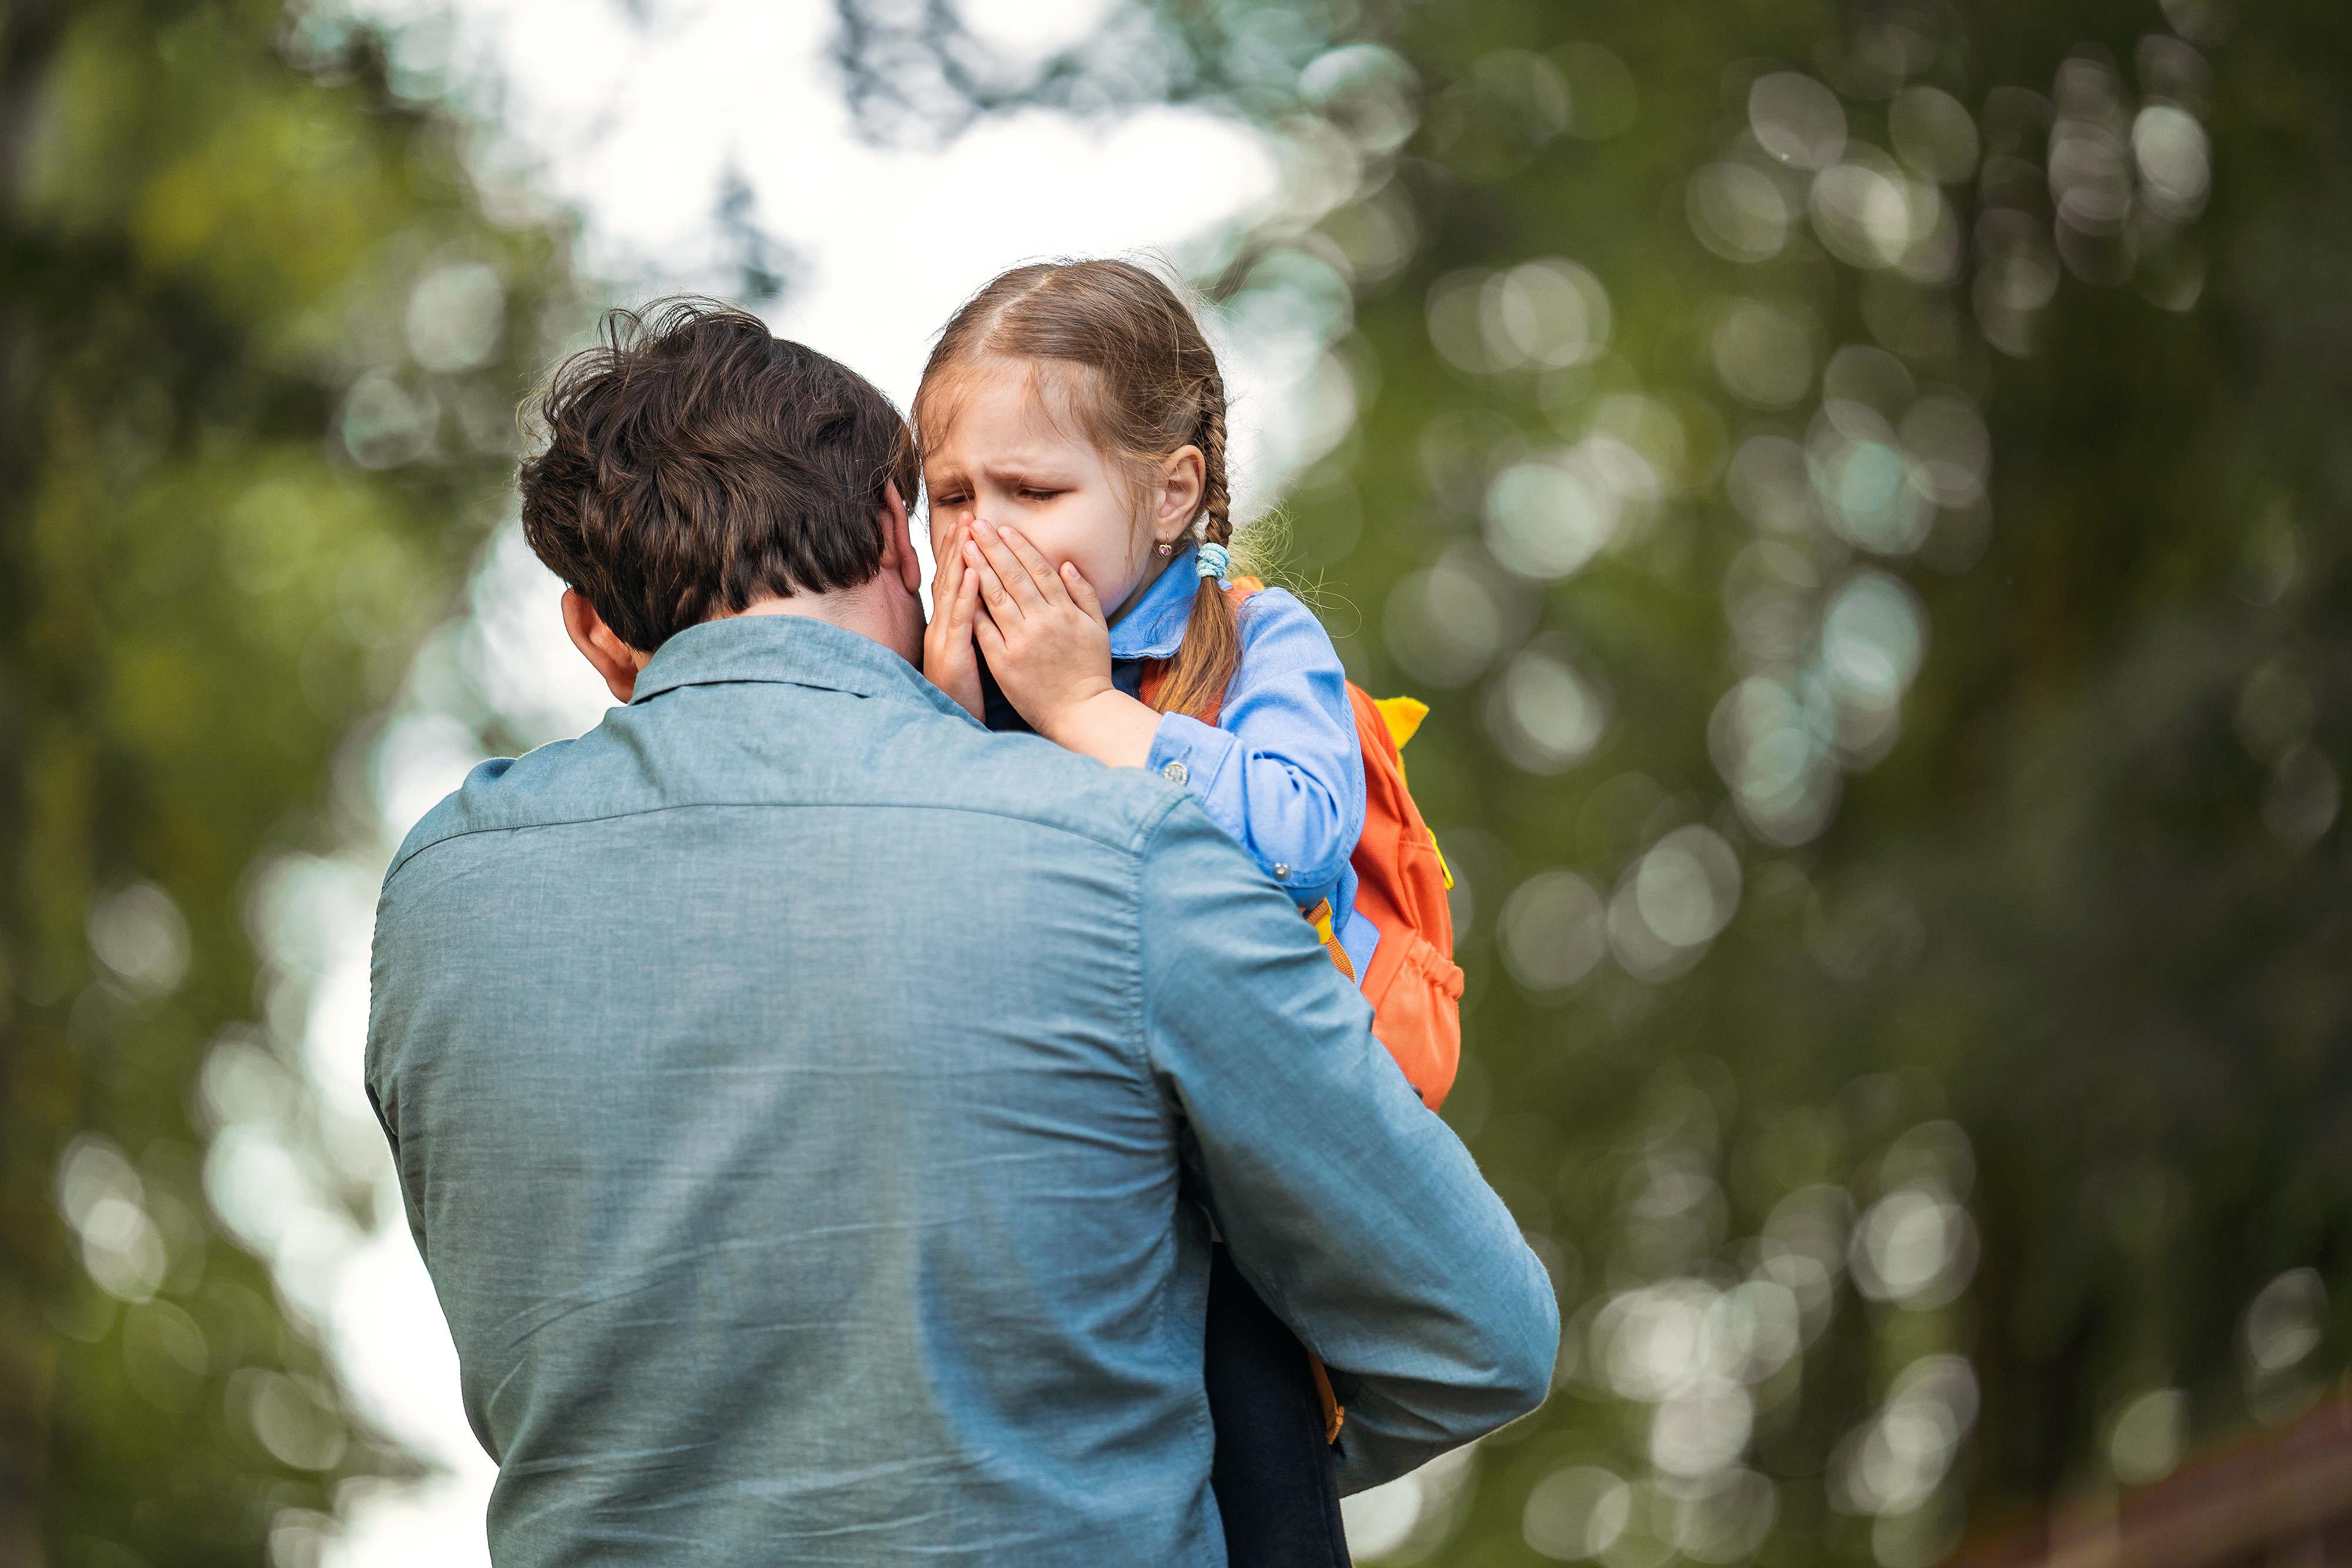 A man holding a crying young girl | Source: Shutterstock